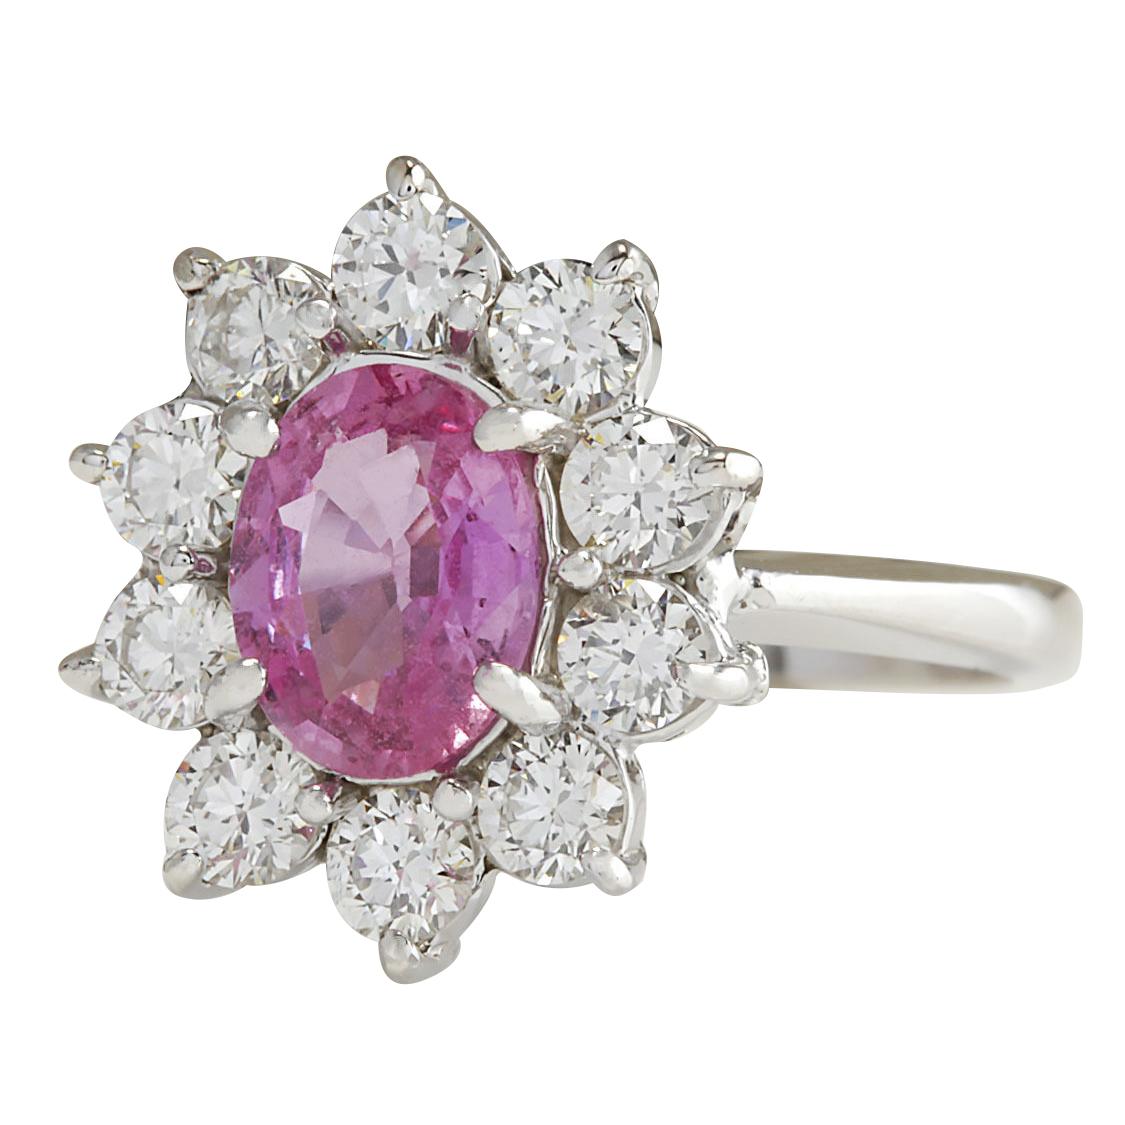 Elevate your style with our exquisite 2.30 Carat Natural Pink Sapphire Ring, set in luxurious 14K White Gold. The centerpiece of this captivating ring is a radiant pink Sapphire, weighing 1.29 Carats and measuring 8.00x6.00 mm. Adorning the sides